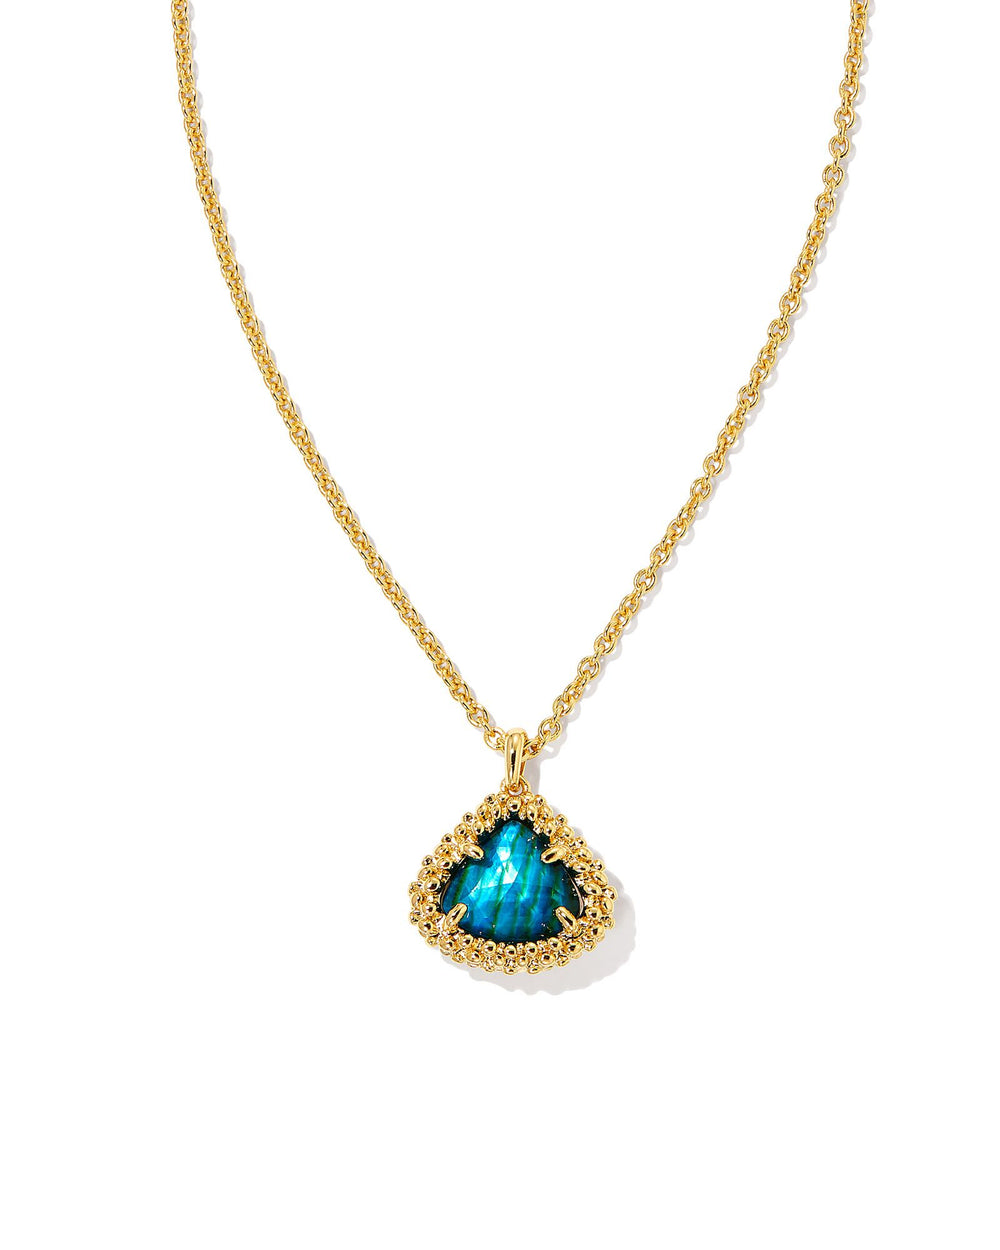 Framed Kendall Short Gold Pendant Necklace in Teal Abalone